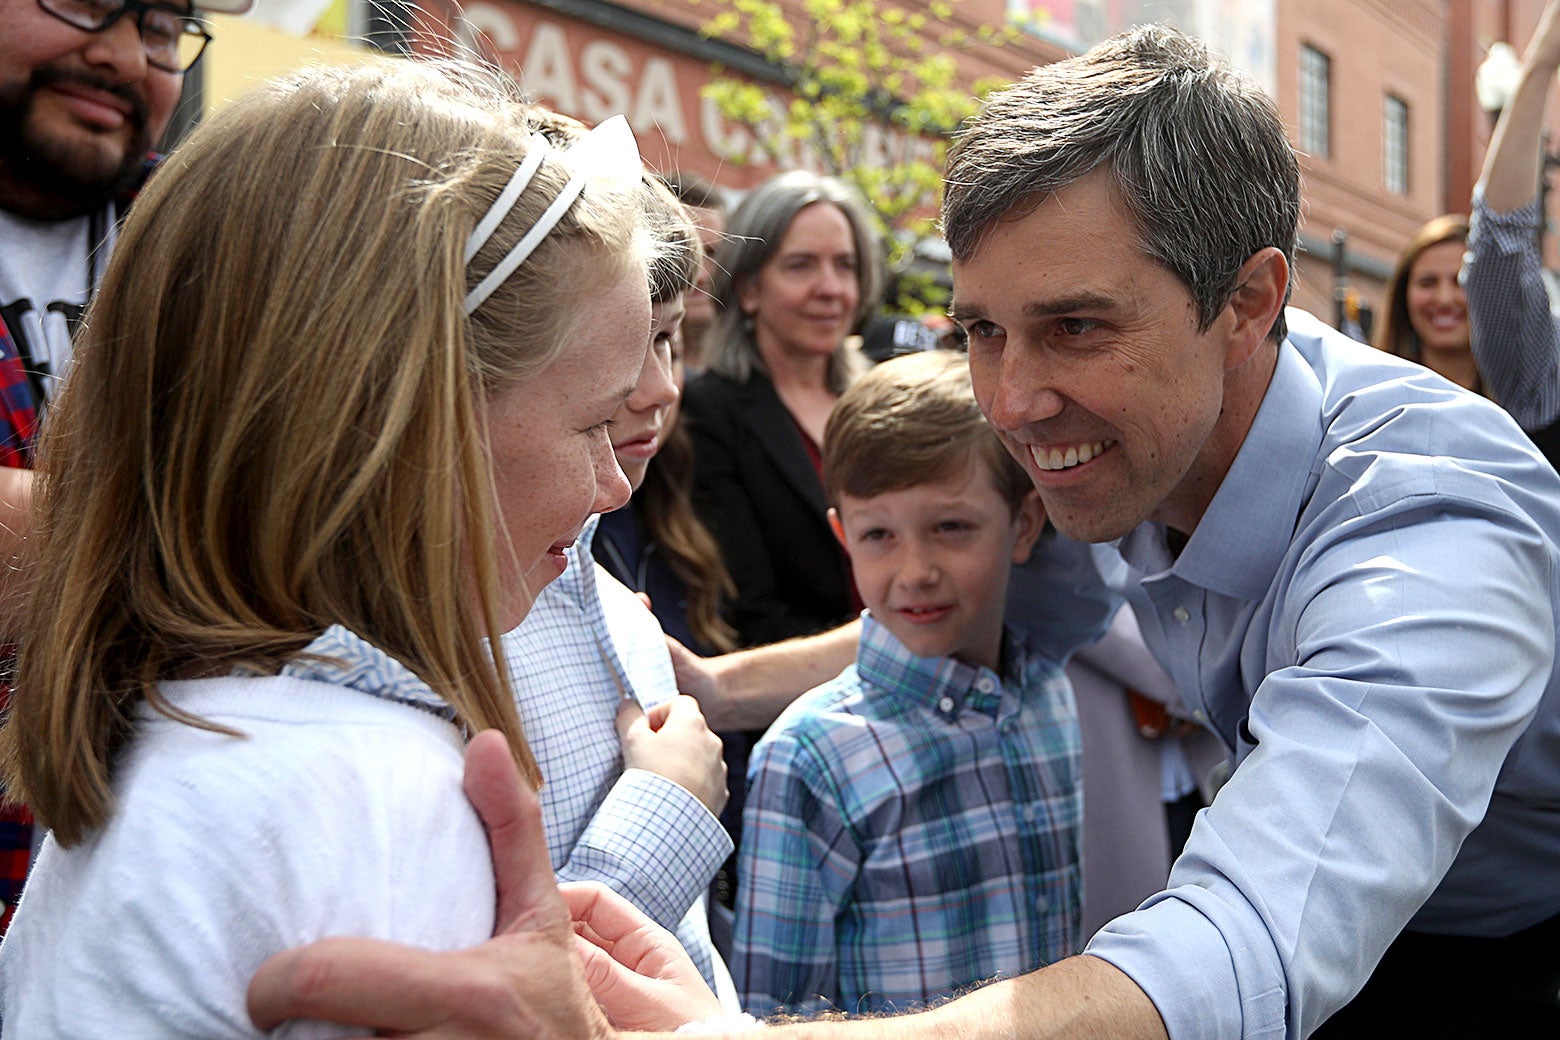 Beto O'Rourke leans down and puts his arms around his three children at an event.